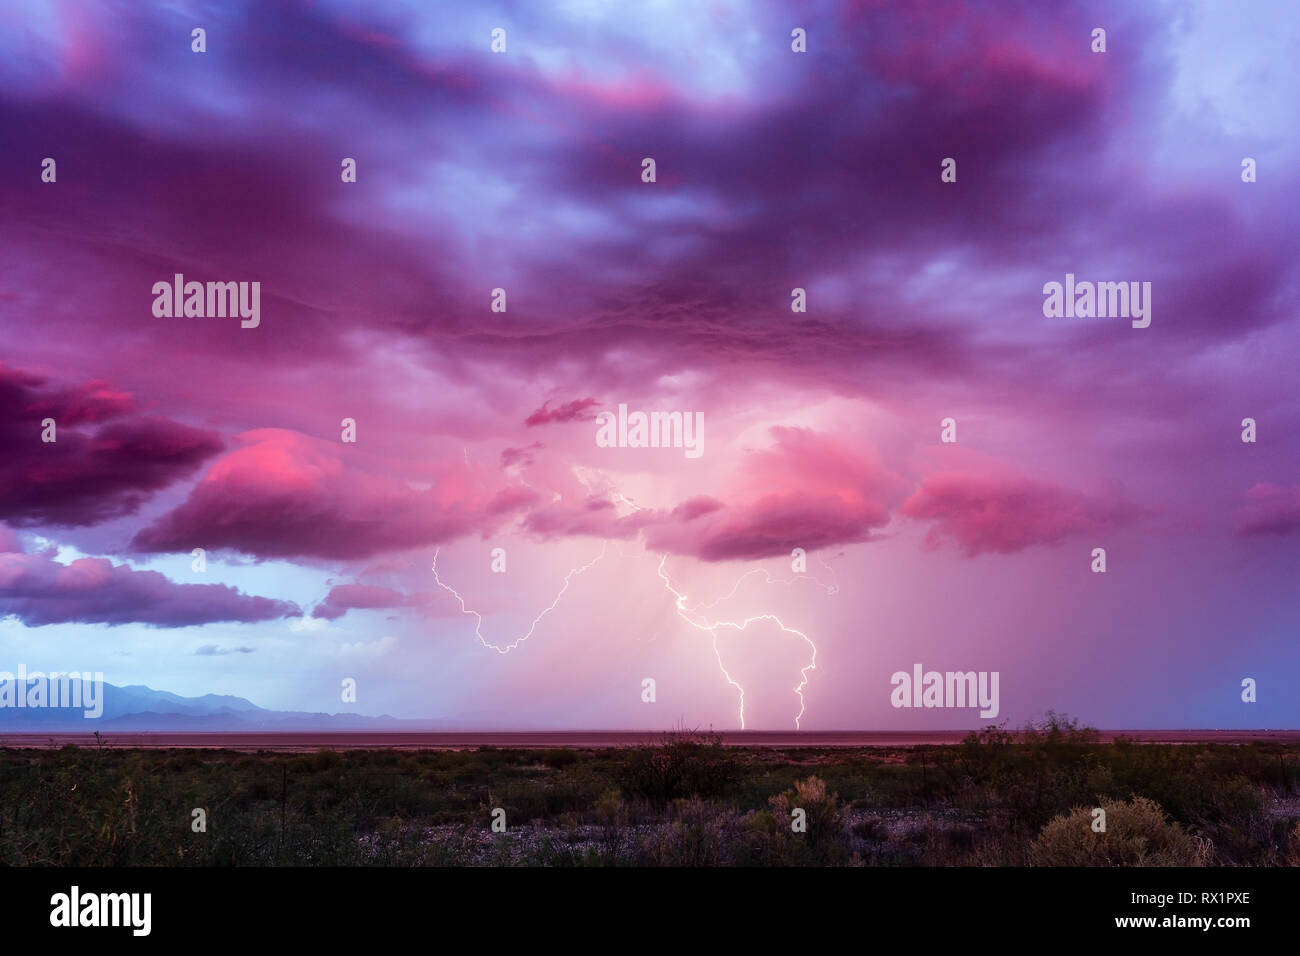 Lightning bolt striking from a storm over the Willcox Playa at sunset in Willcox, Arizona, USA Stock Photo